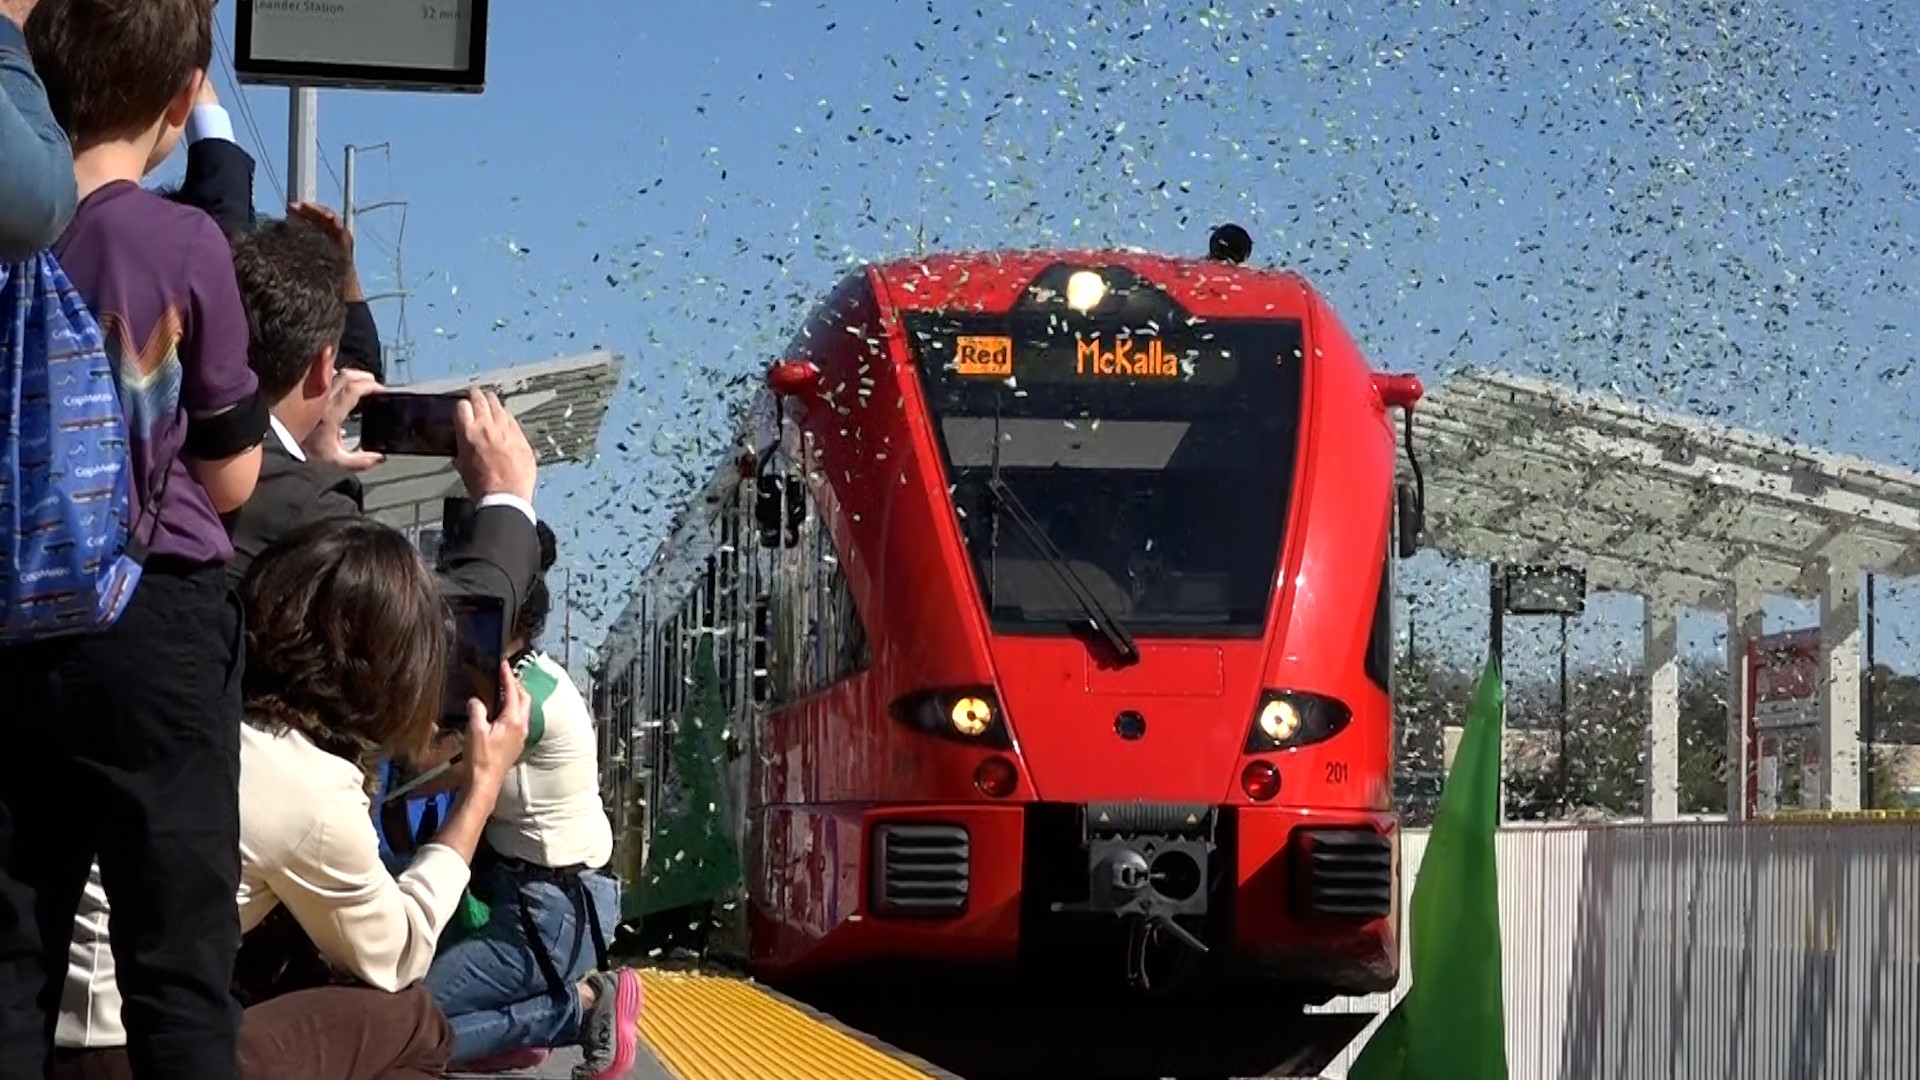 Before Austin FC kicked off the 2024 season, CapMetro opened its new McKalla Station that will drop people off less than 100 feet from the Q2 Stadium entrance.